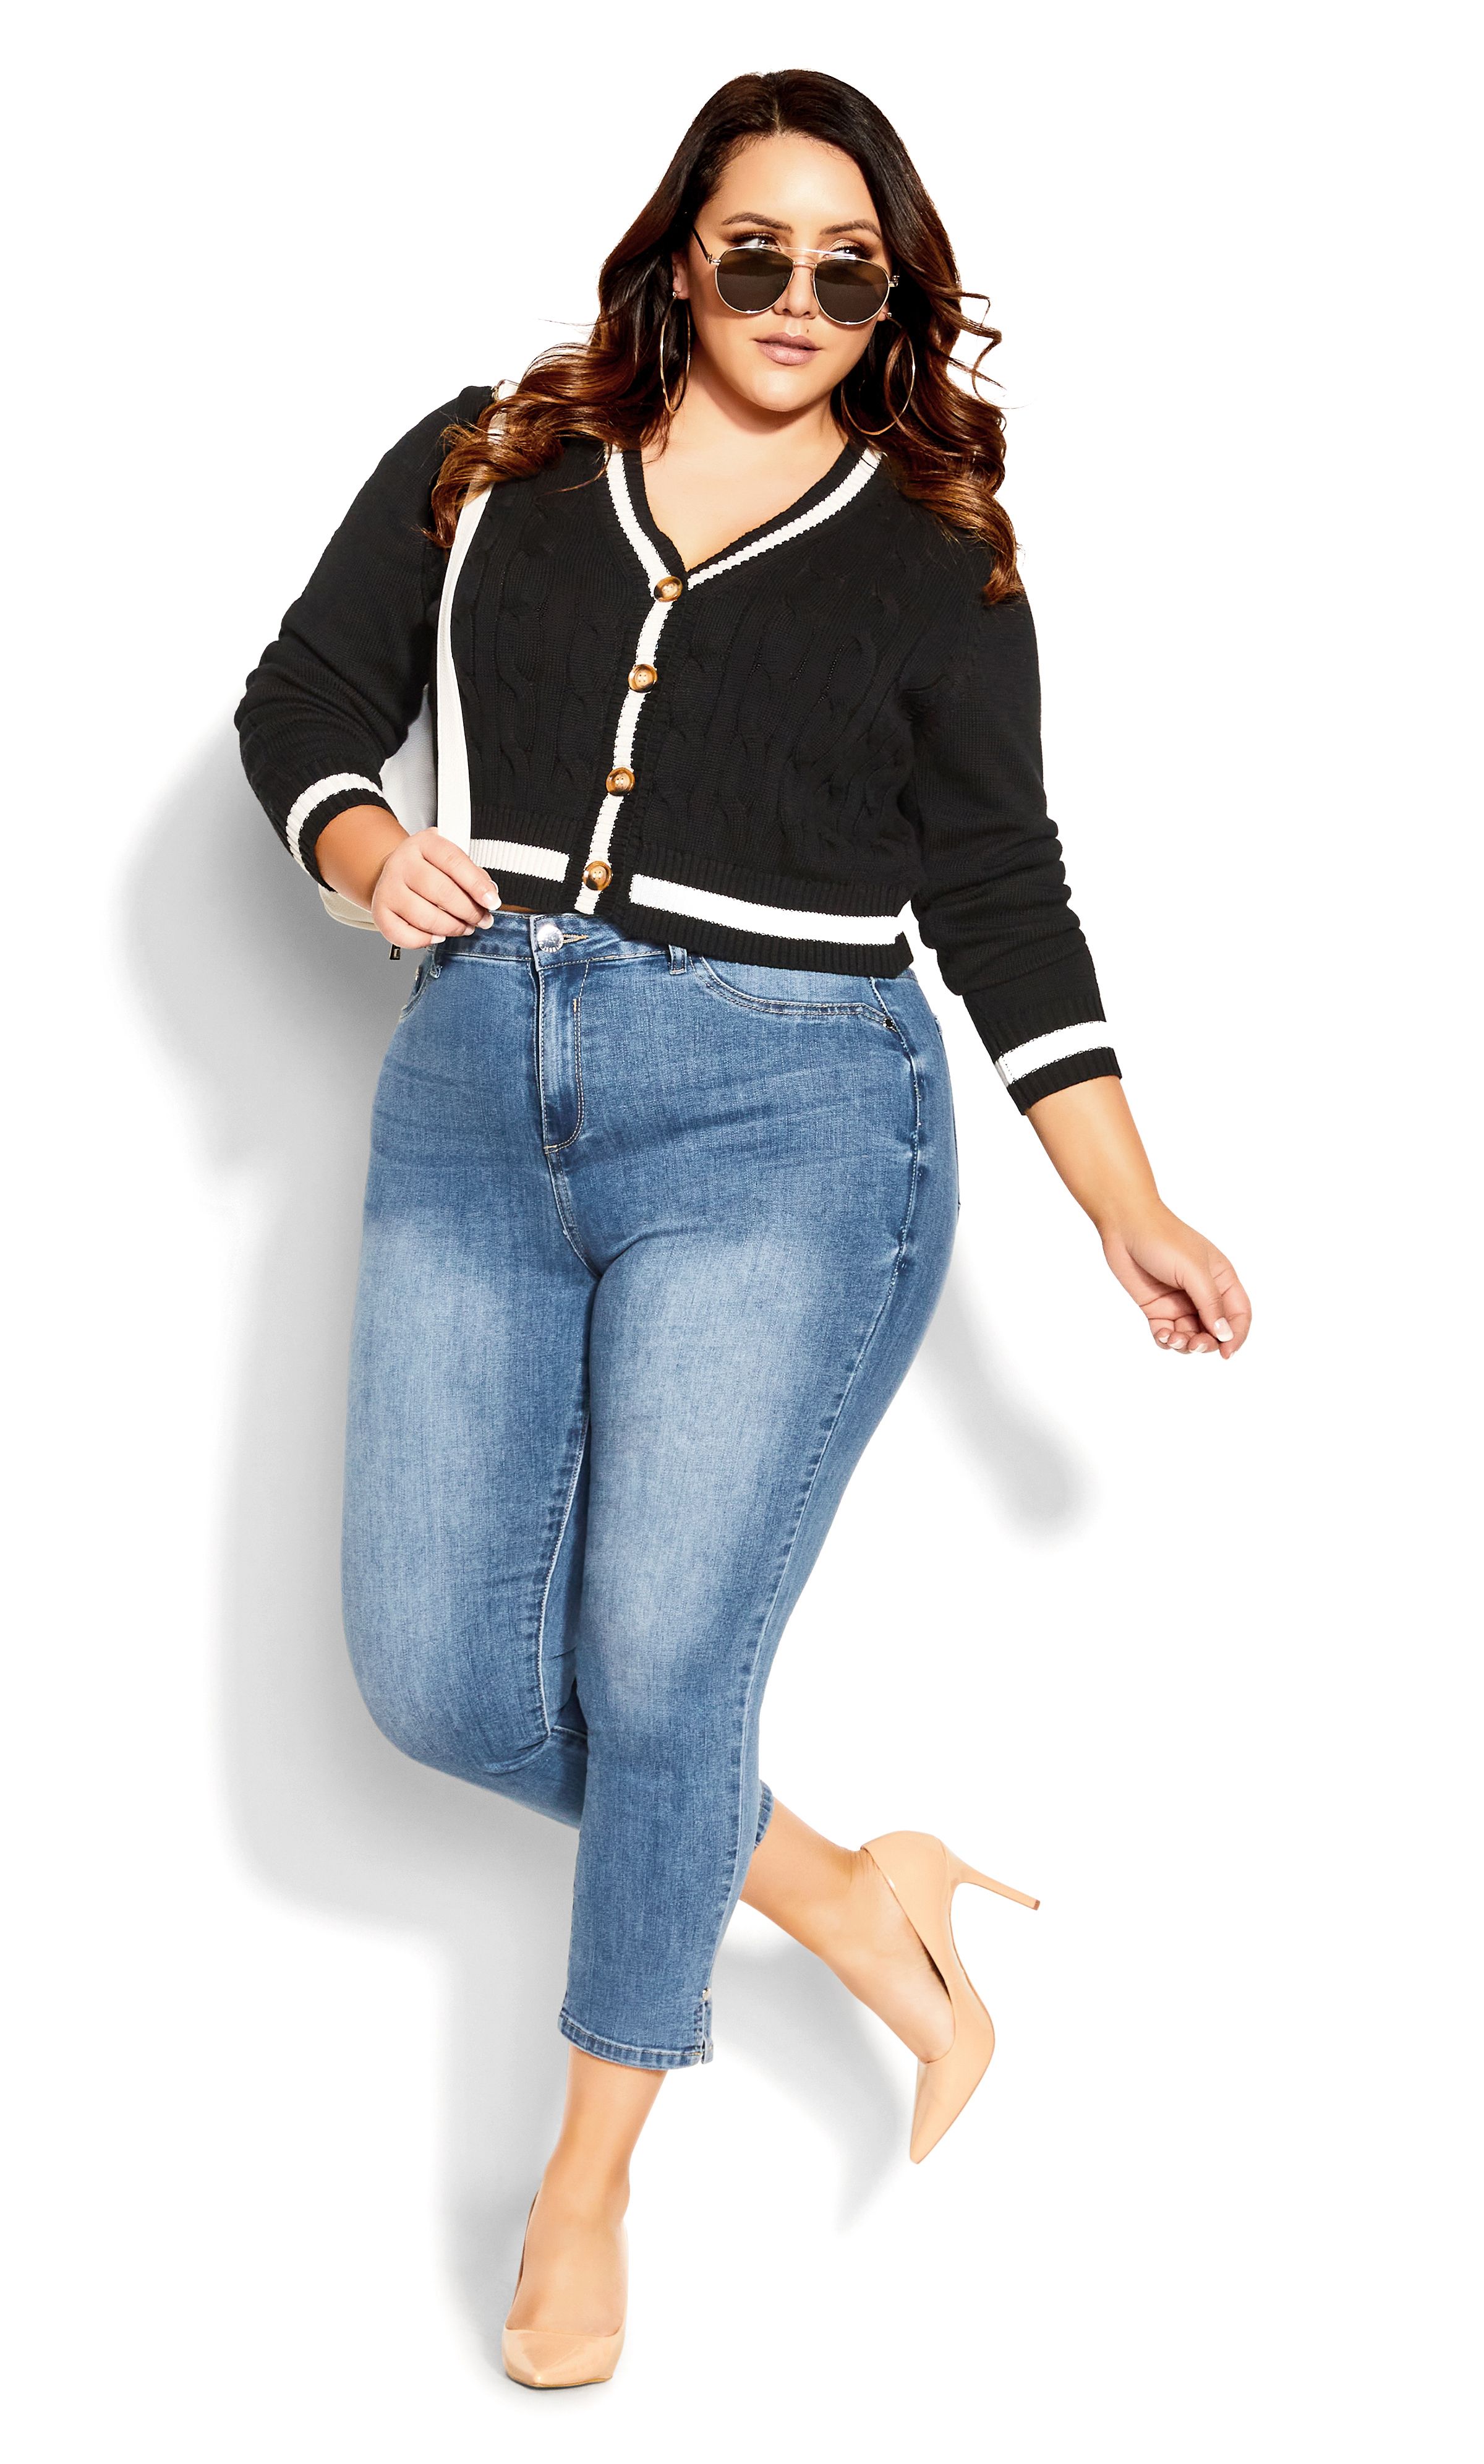 The Harley Renegade Jean will have you flaunting your killer curves in no time! This fashion-forward pair offers the perfect fit for an hourglass shape, complete with a mid rise waist and flattering cropped hemline. Key Features Include: - Harley: the perfect fit for an hourglass body shape - Mid rise - Single button & zip fly closure - 4-pocket denim styling - Stretch cotton blend fabrication - Skinny leg - High denim fibre retention to maintain shape - Signature Chic Denim hardware throughout zips, buttons and rivets - Cropped length We love these jeans with a breezy blouse, lace up block heels and chic baguette bag.